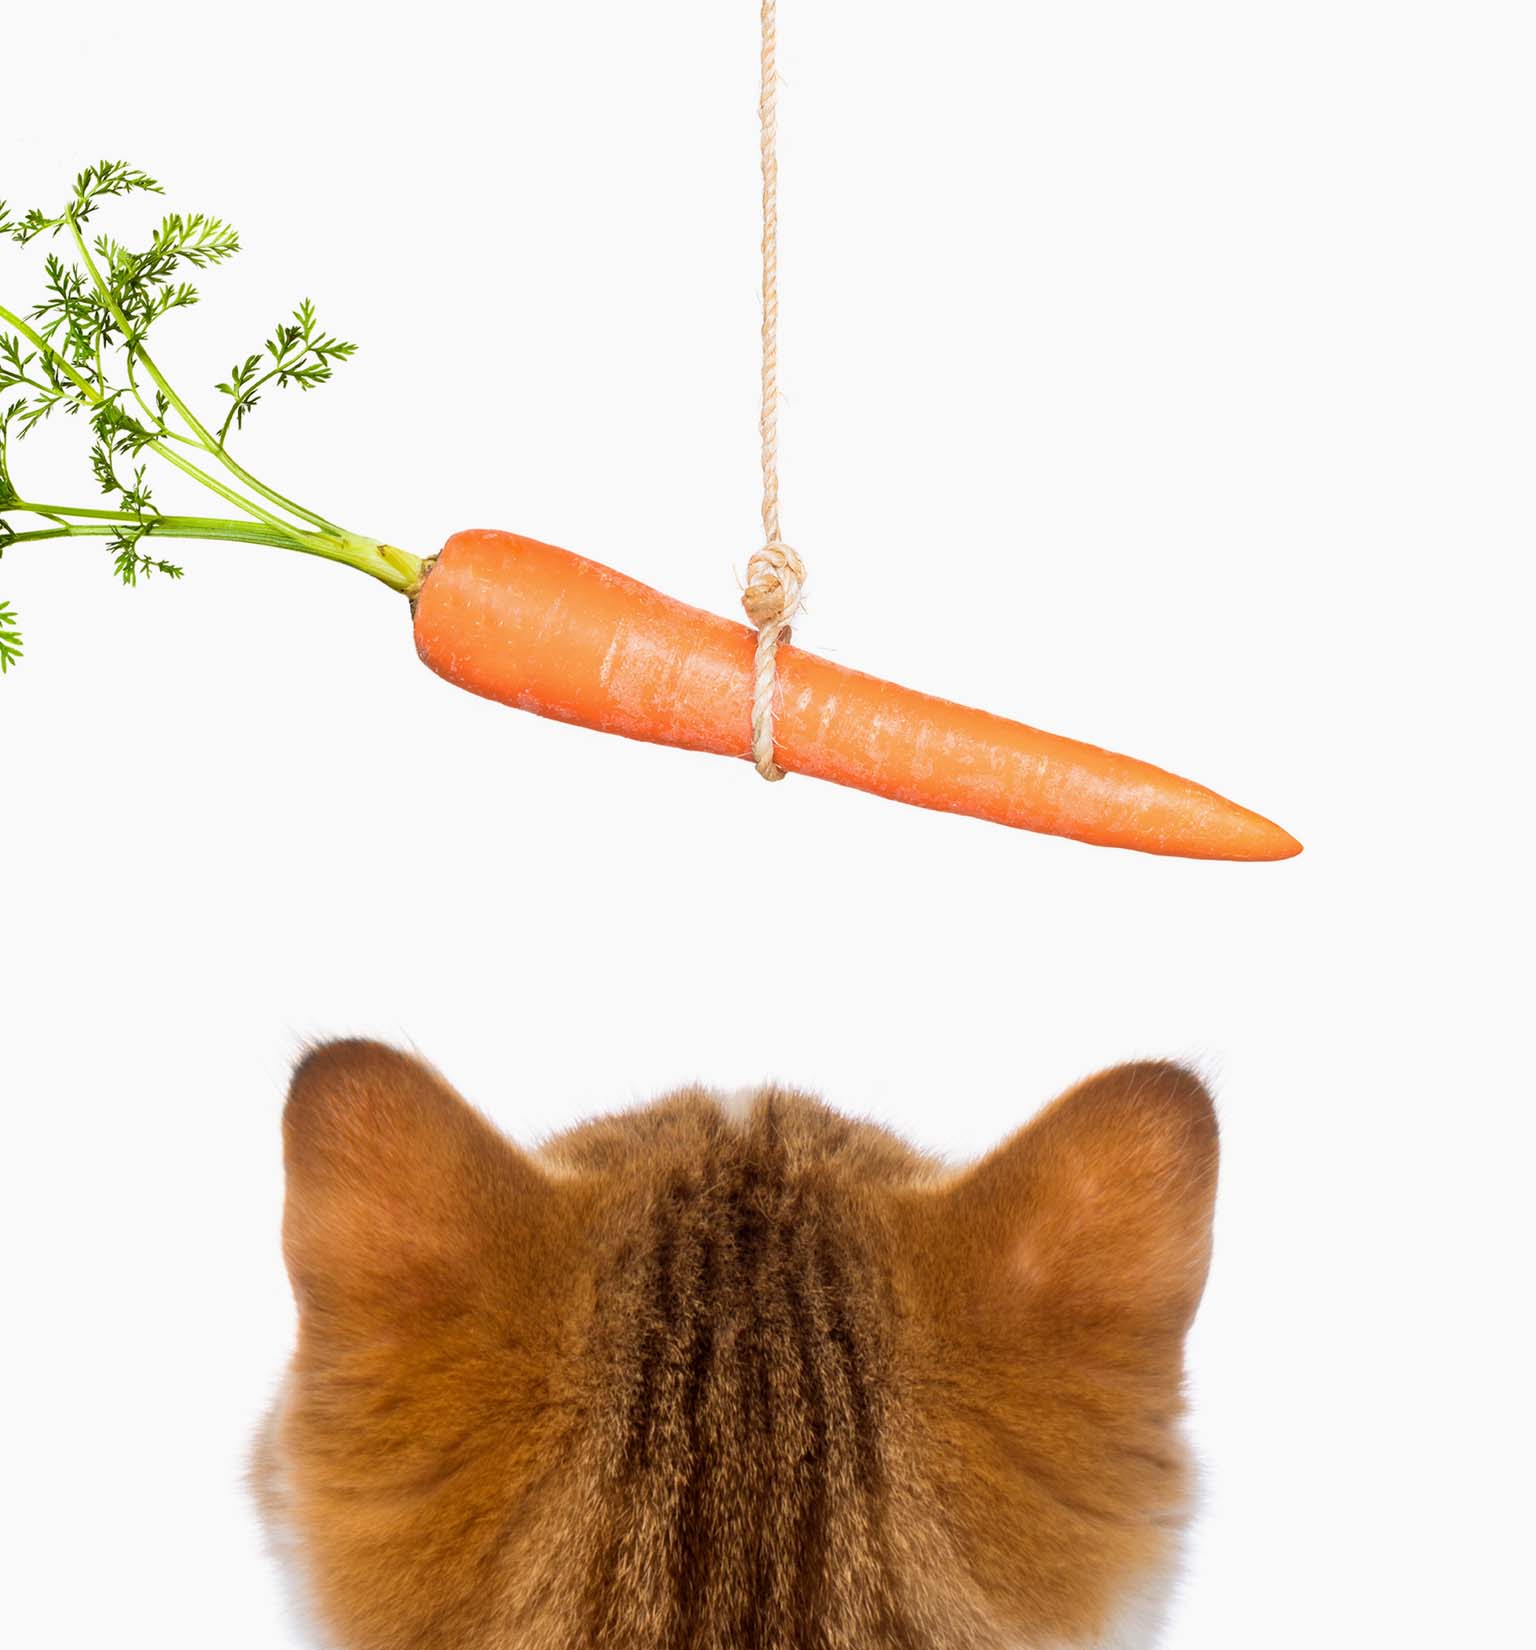 Is carrot good for my cat?